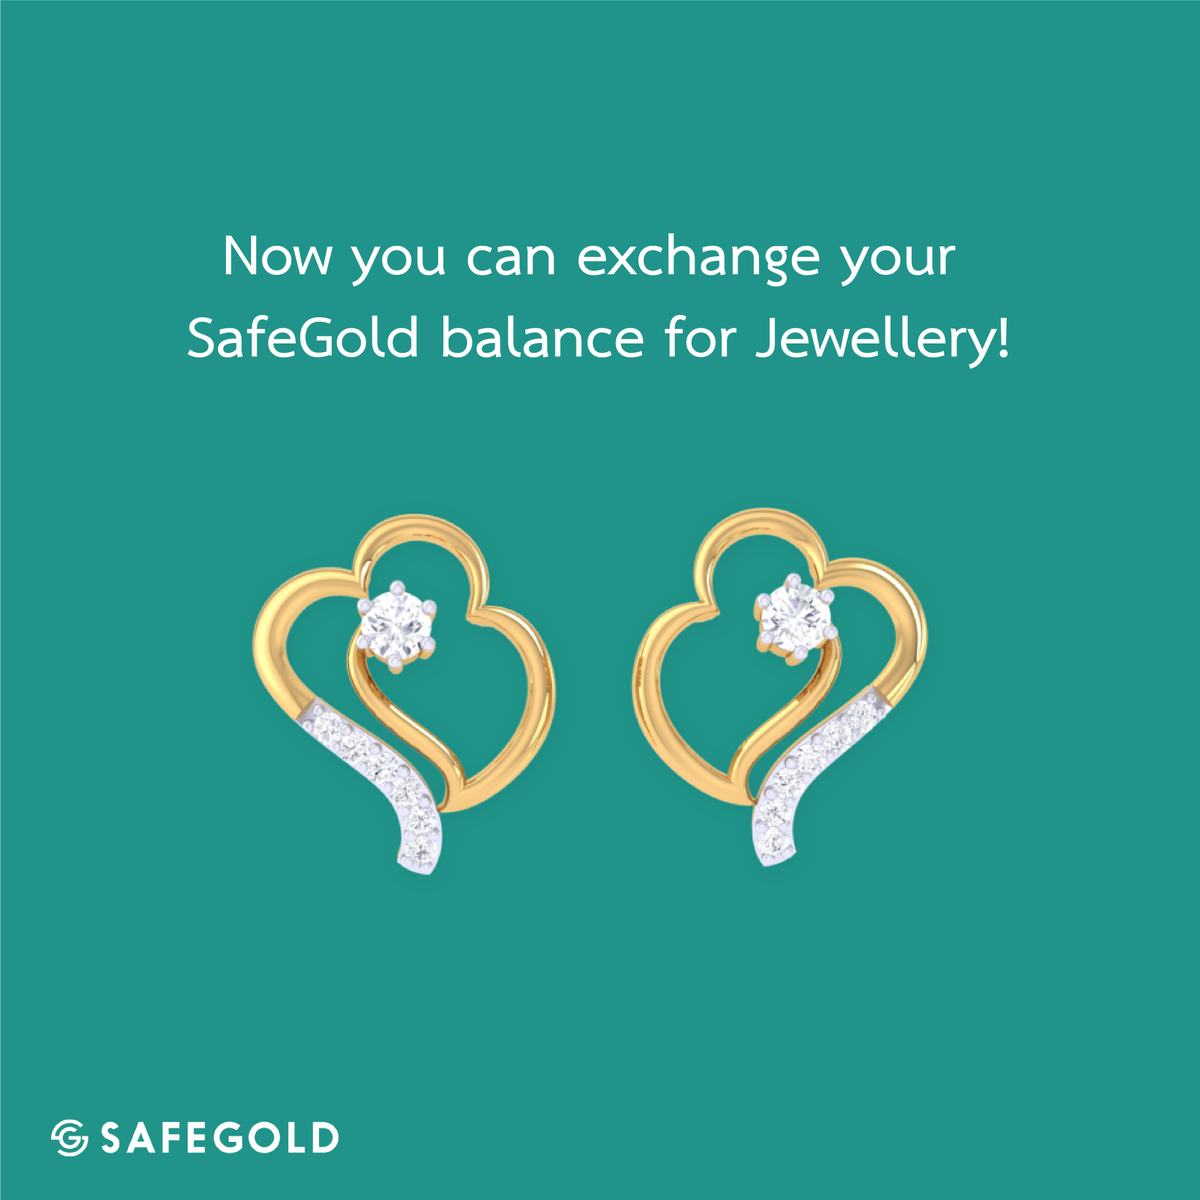 Now you can earn gold for buying jewellery! Exchange your digital gold balance for jewellery and you get 1 gm of gold in your SafeGold digital balance, absolutely FREE! 
Don’t delay, the offer ends today!
To learn more, visit safegold.com/jewellery-offer

#SafeGold #exchangegold